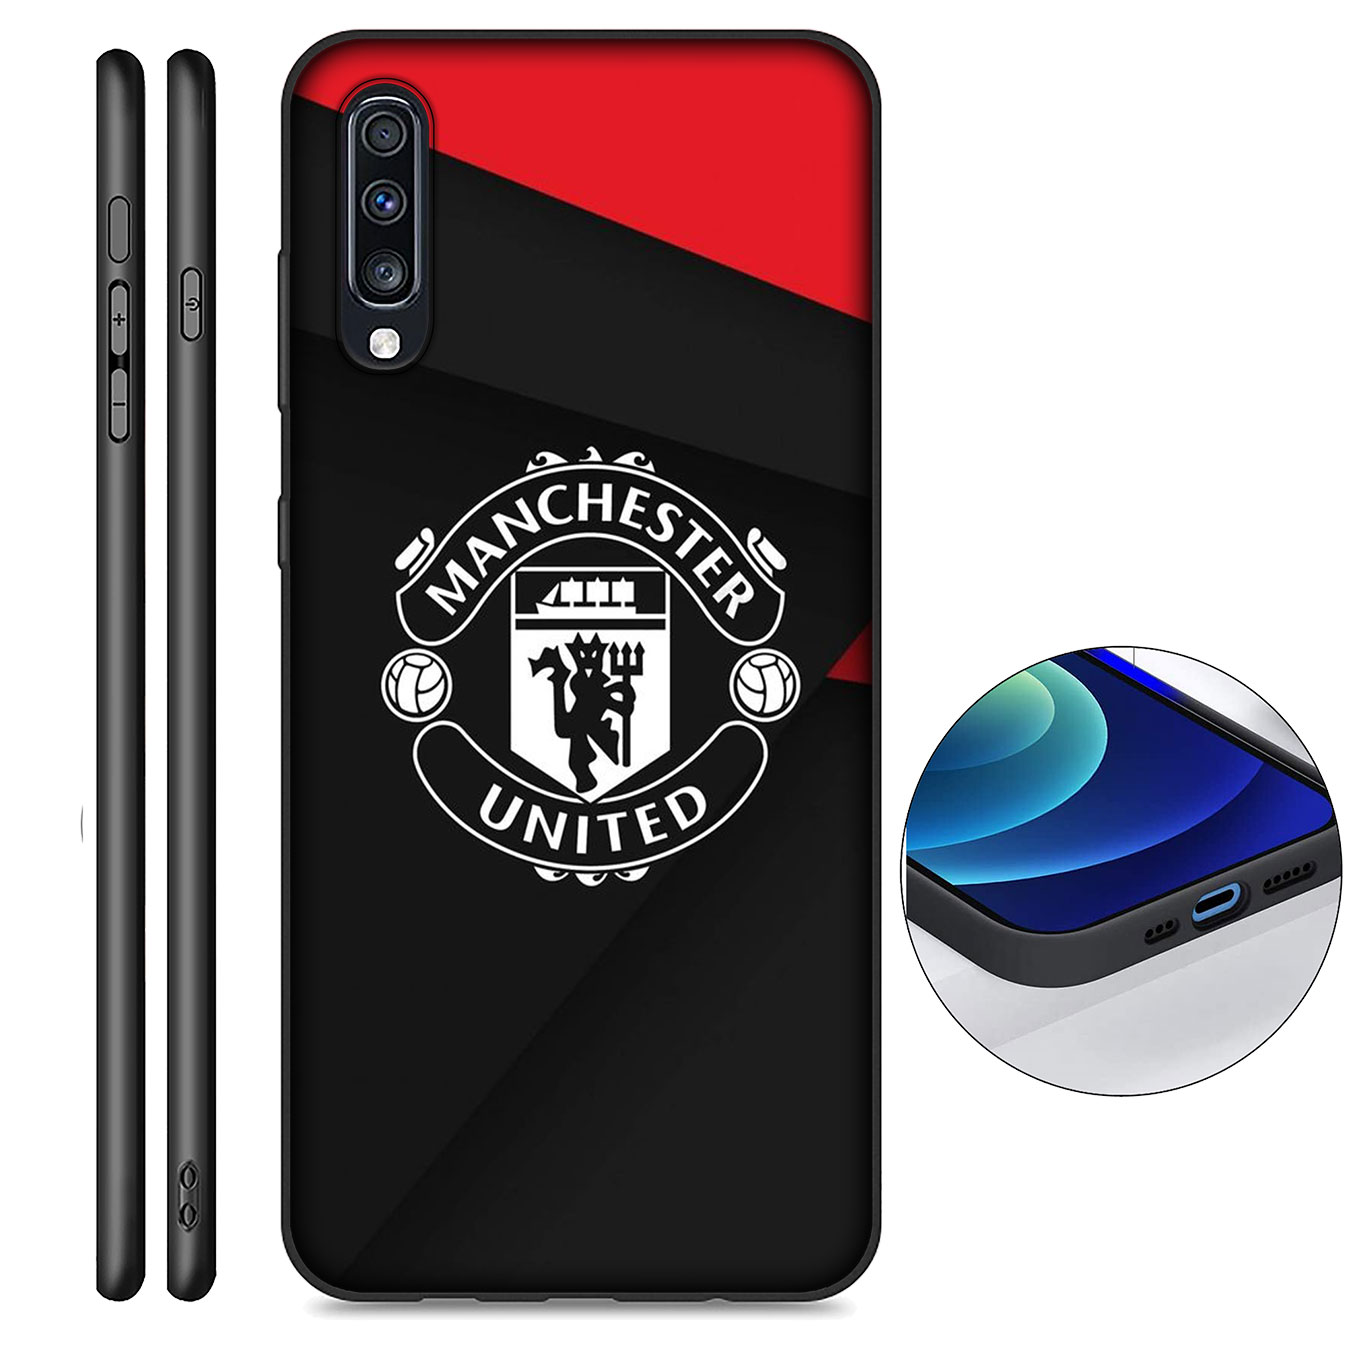 Ốp điện thoại silicon họa tiết Manchester United cho iPhone XR X XS Max 7 8 6 6s Plus + 6Plus 7Plus 8Plus